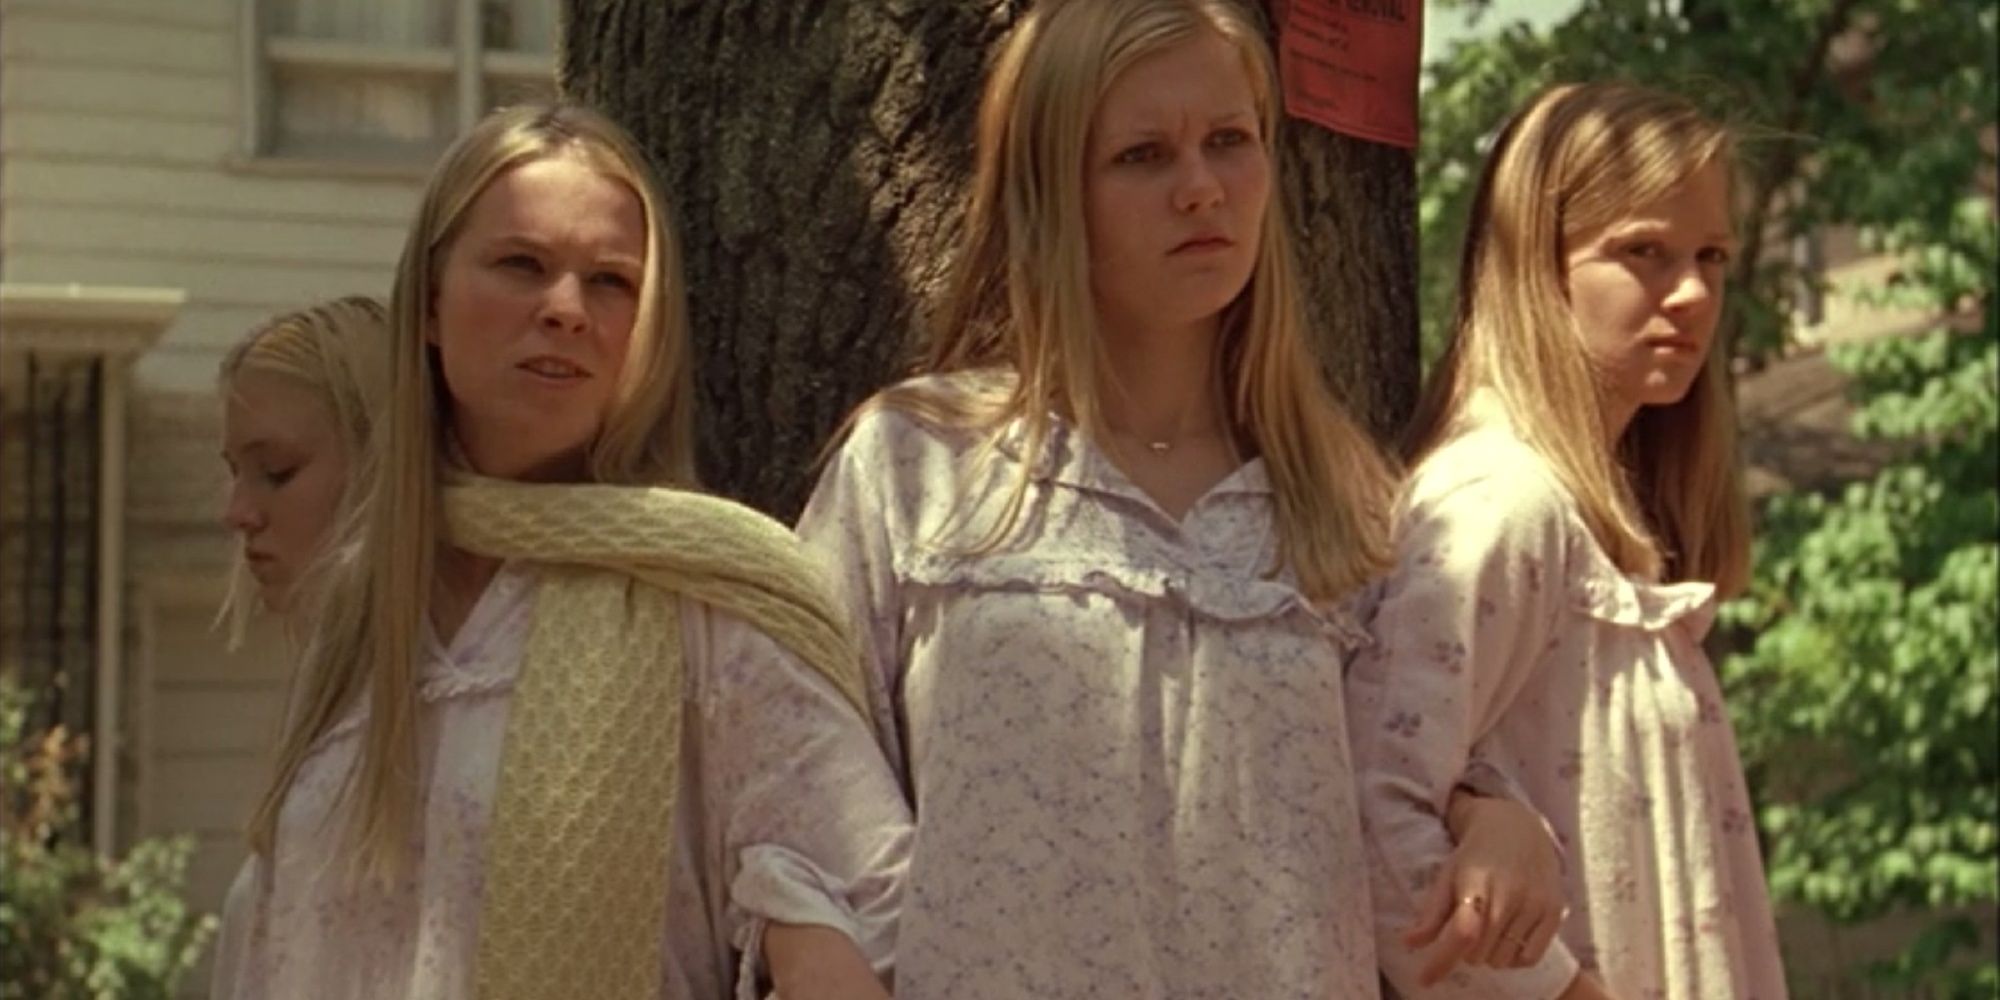 The Lisbon sisters together around a tree in The Virgin Suicides.